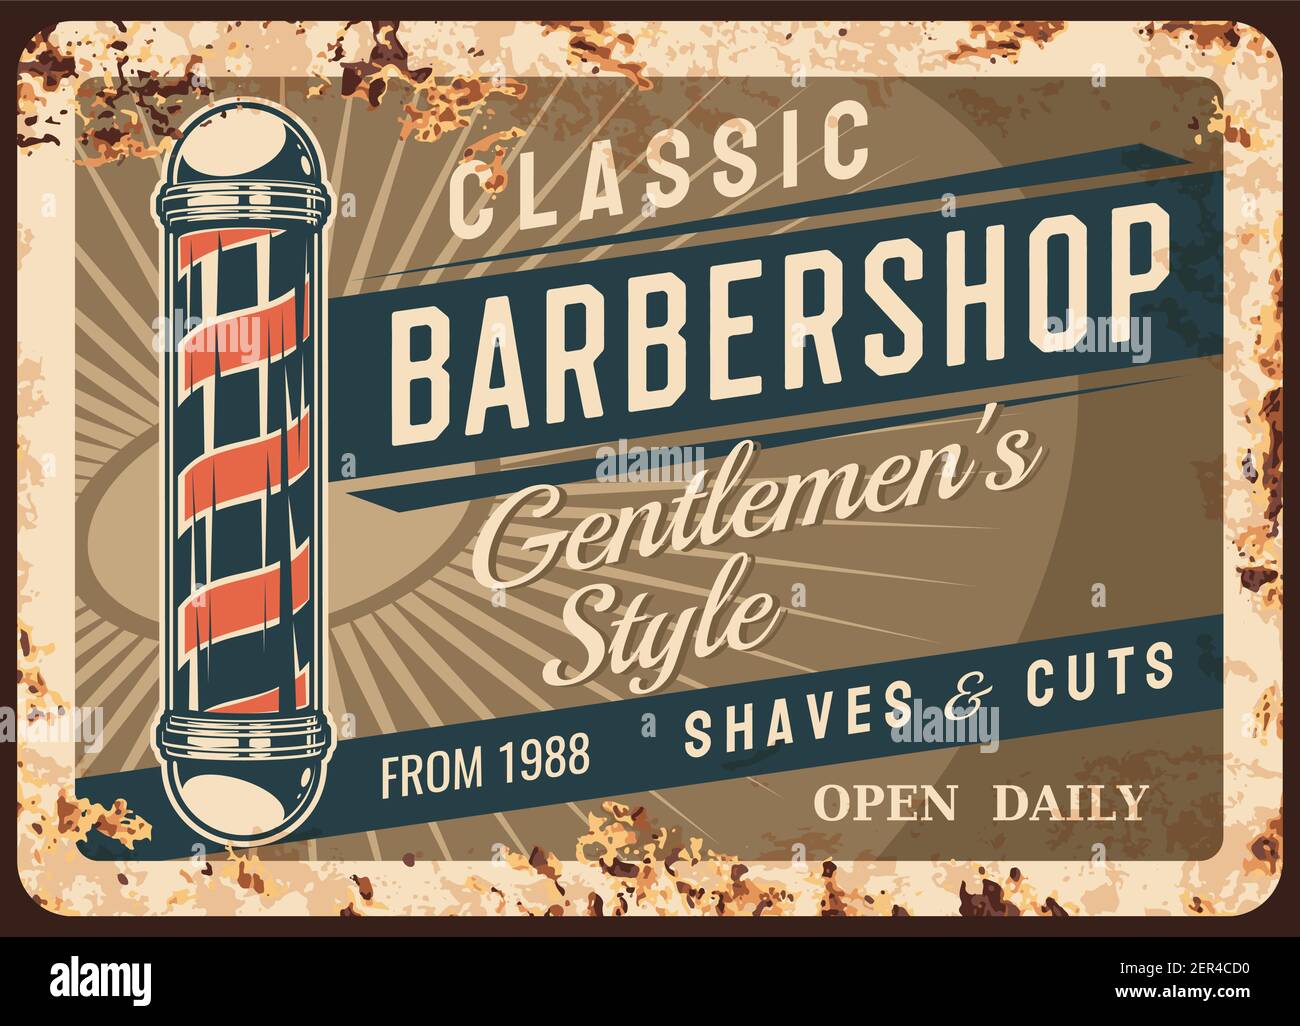 Barbershop Classics Tin Sign Barber Shop Shaving Mens Hairstyle Vintage Ad Style 